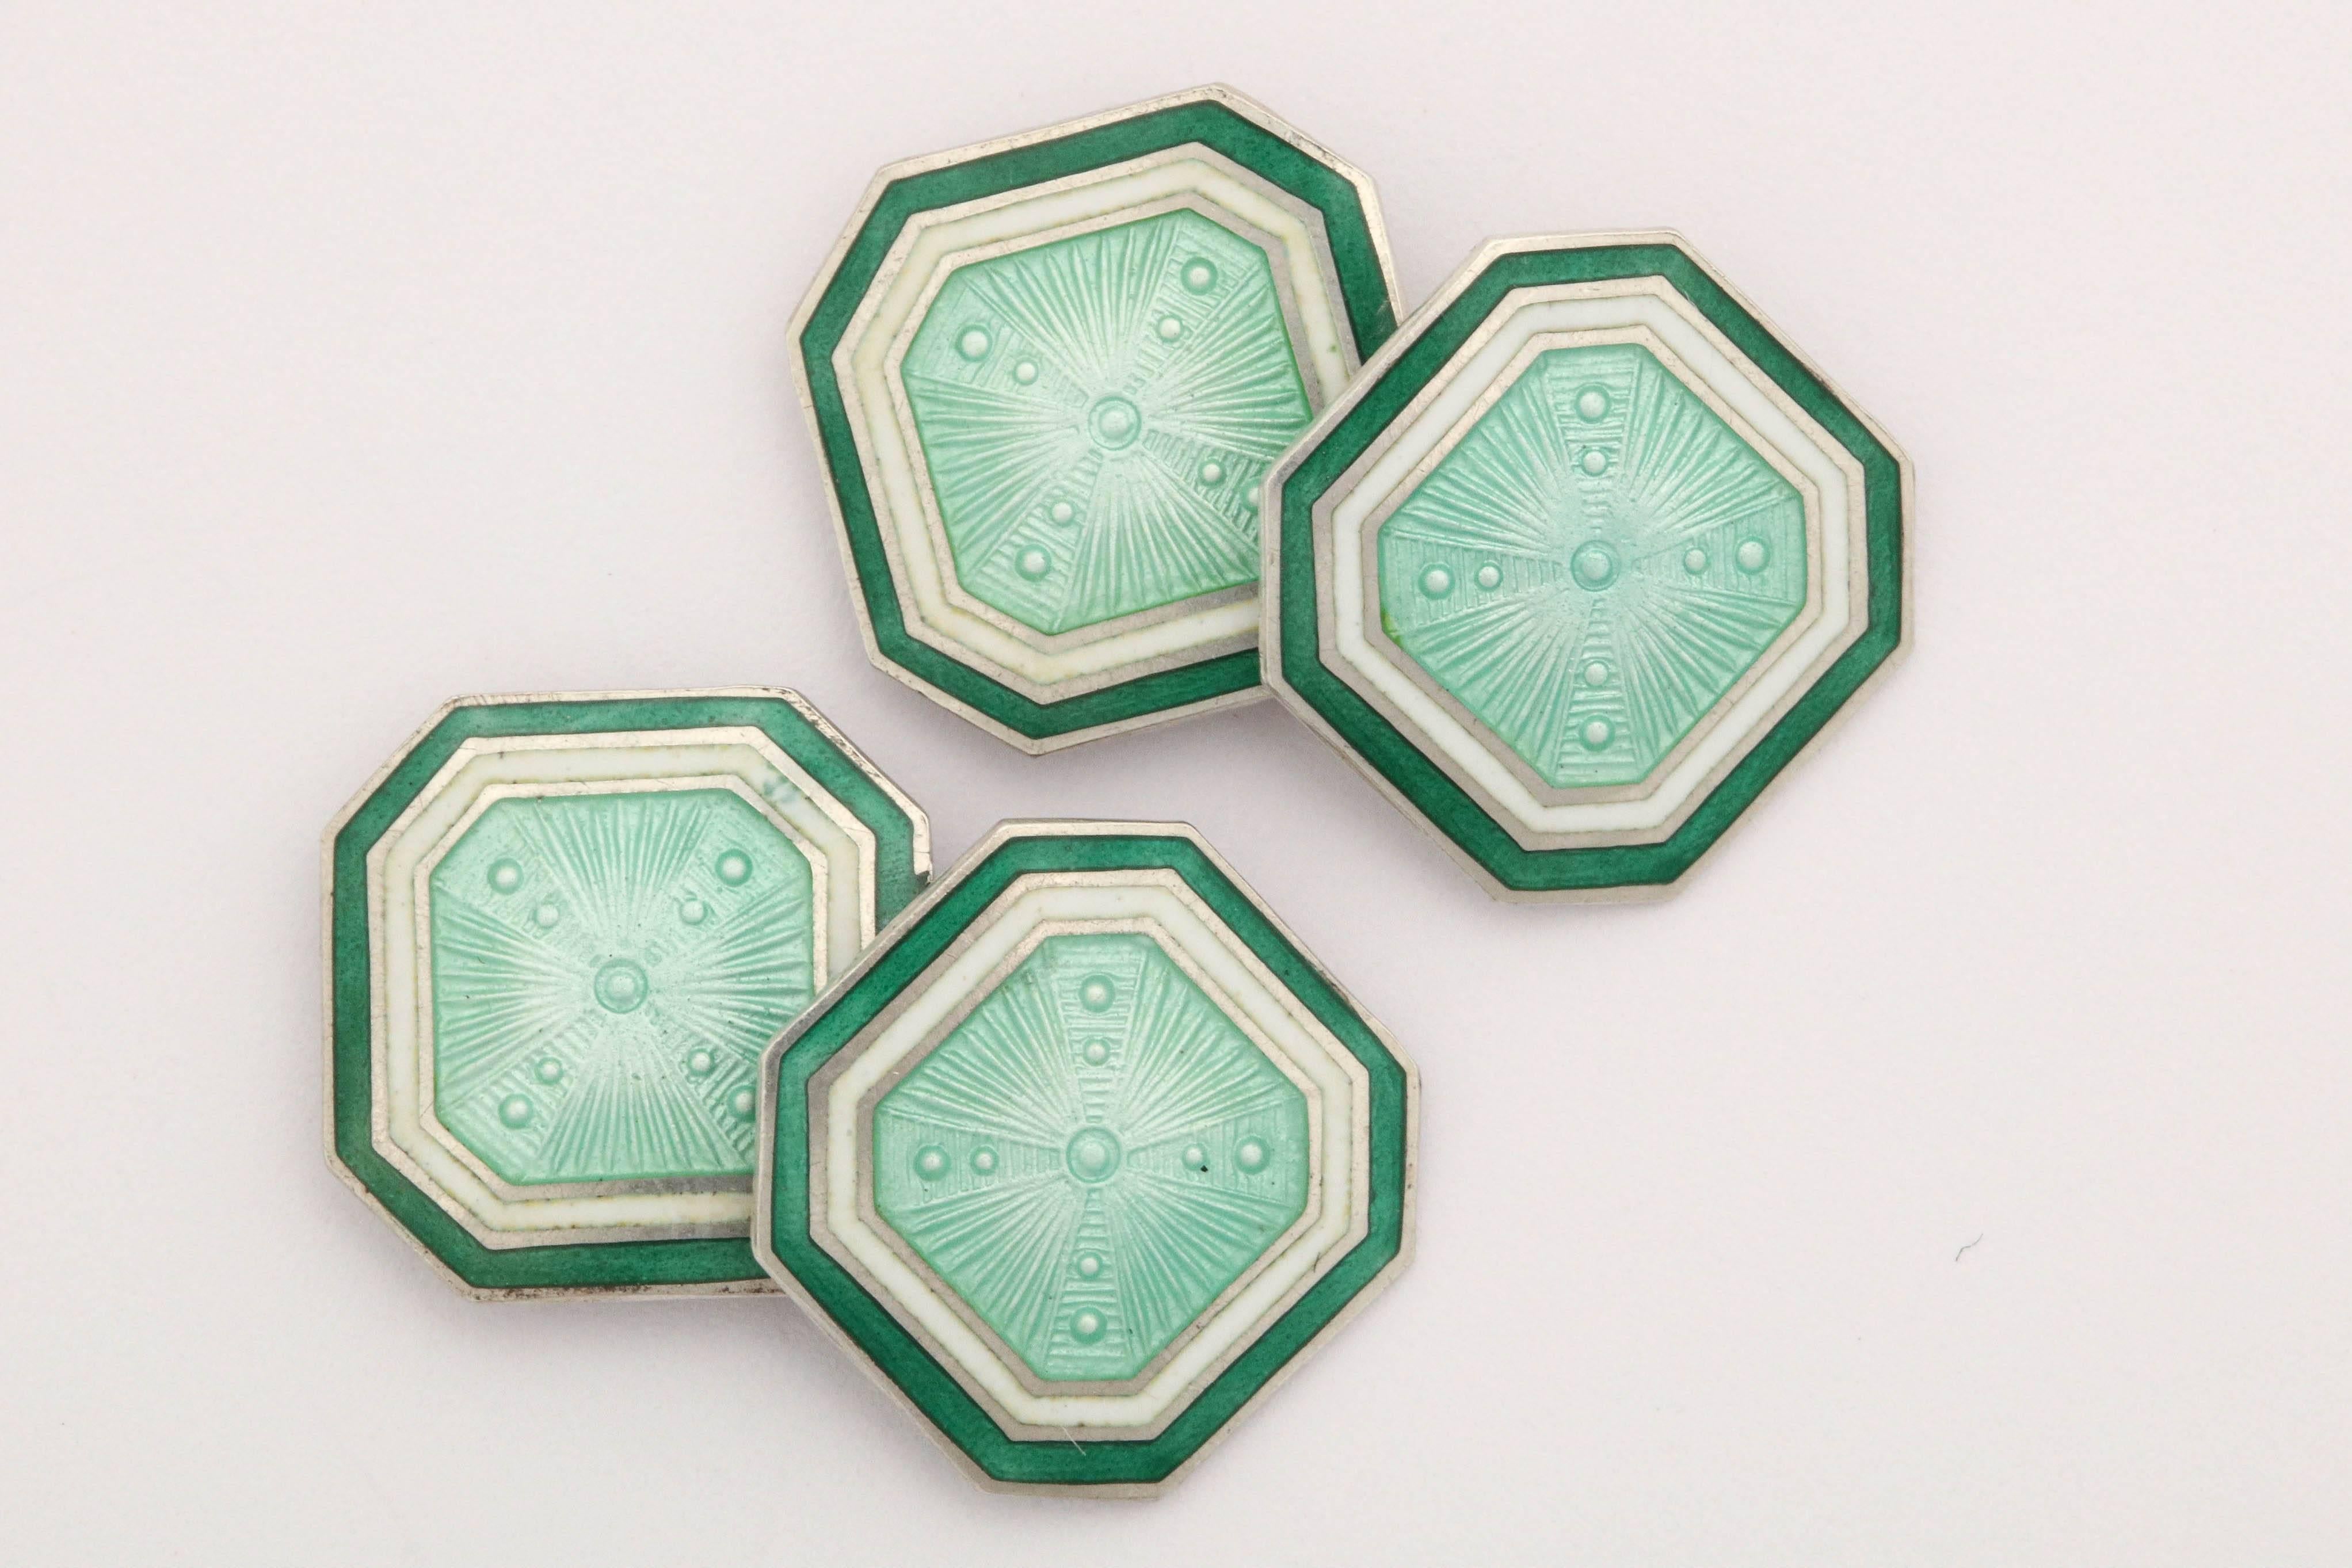 Octagonal with light green center surrounded by white border and dark green border. 
Impressed F & B / Sterling.